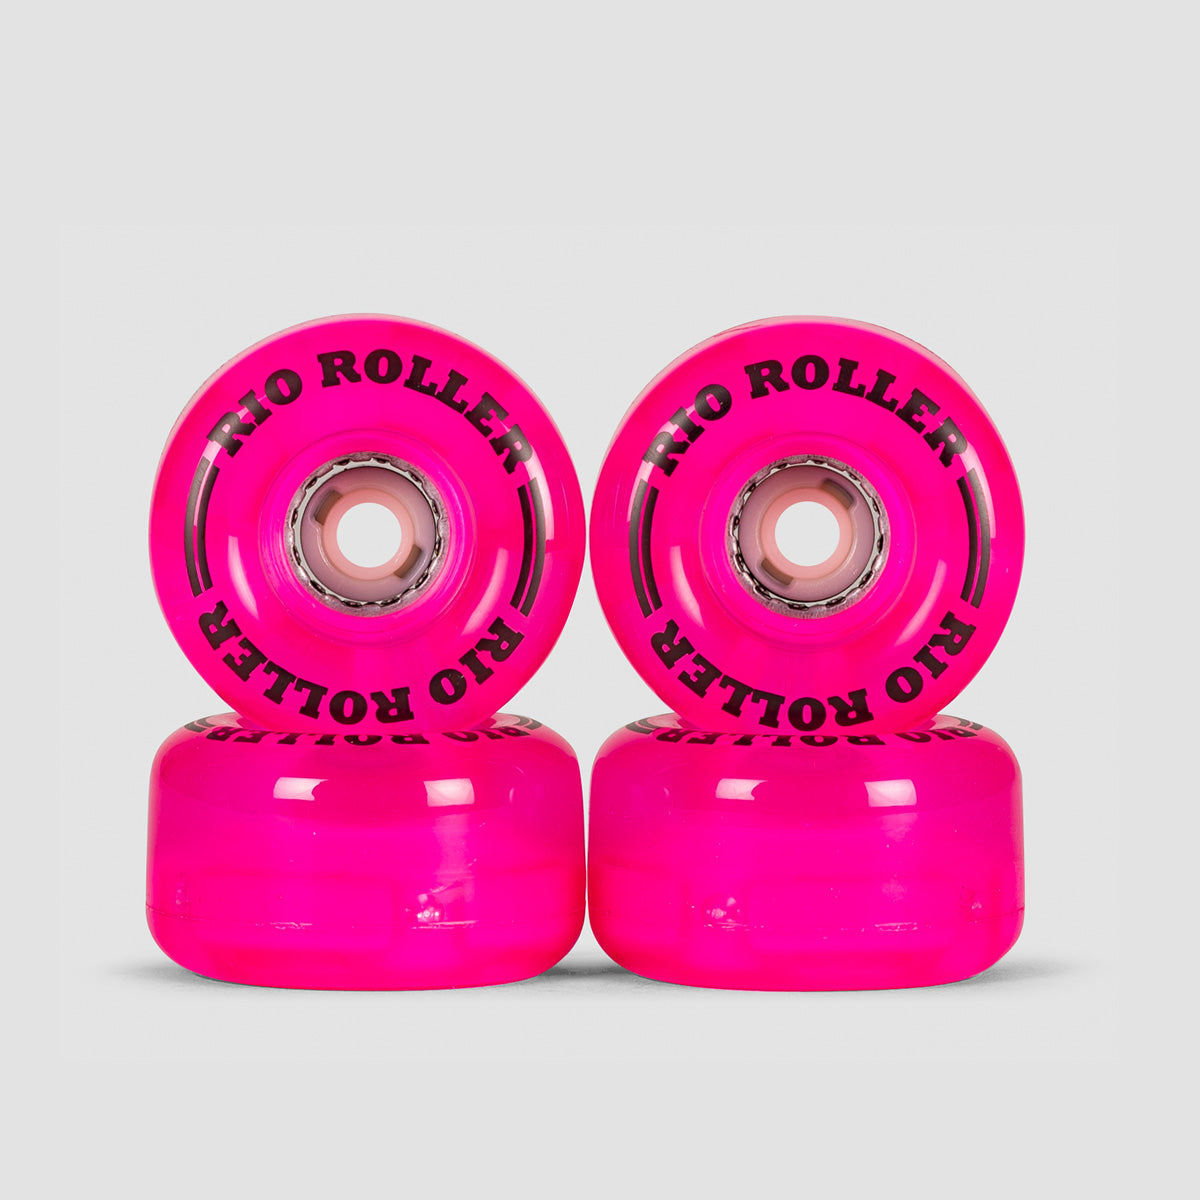 Rio Roller Light Up Wheels X4 Pink Frost 58mm